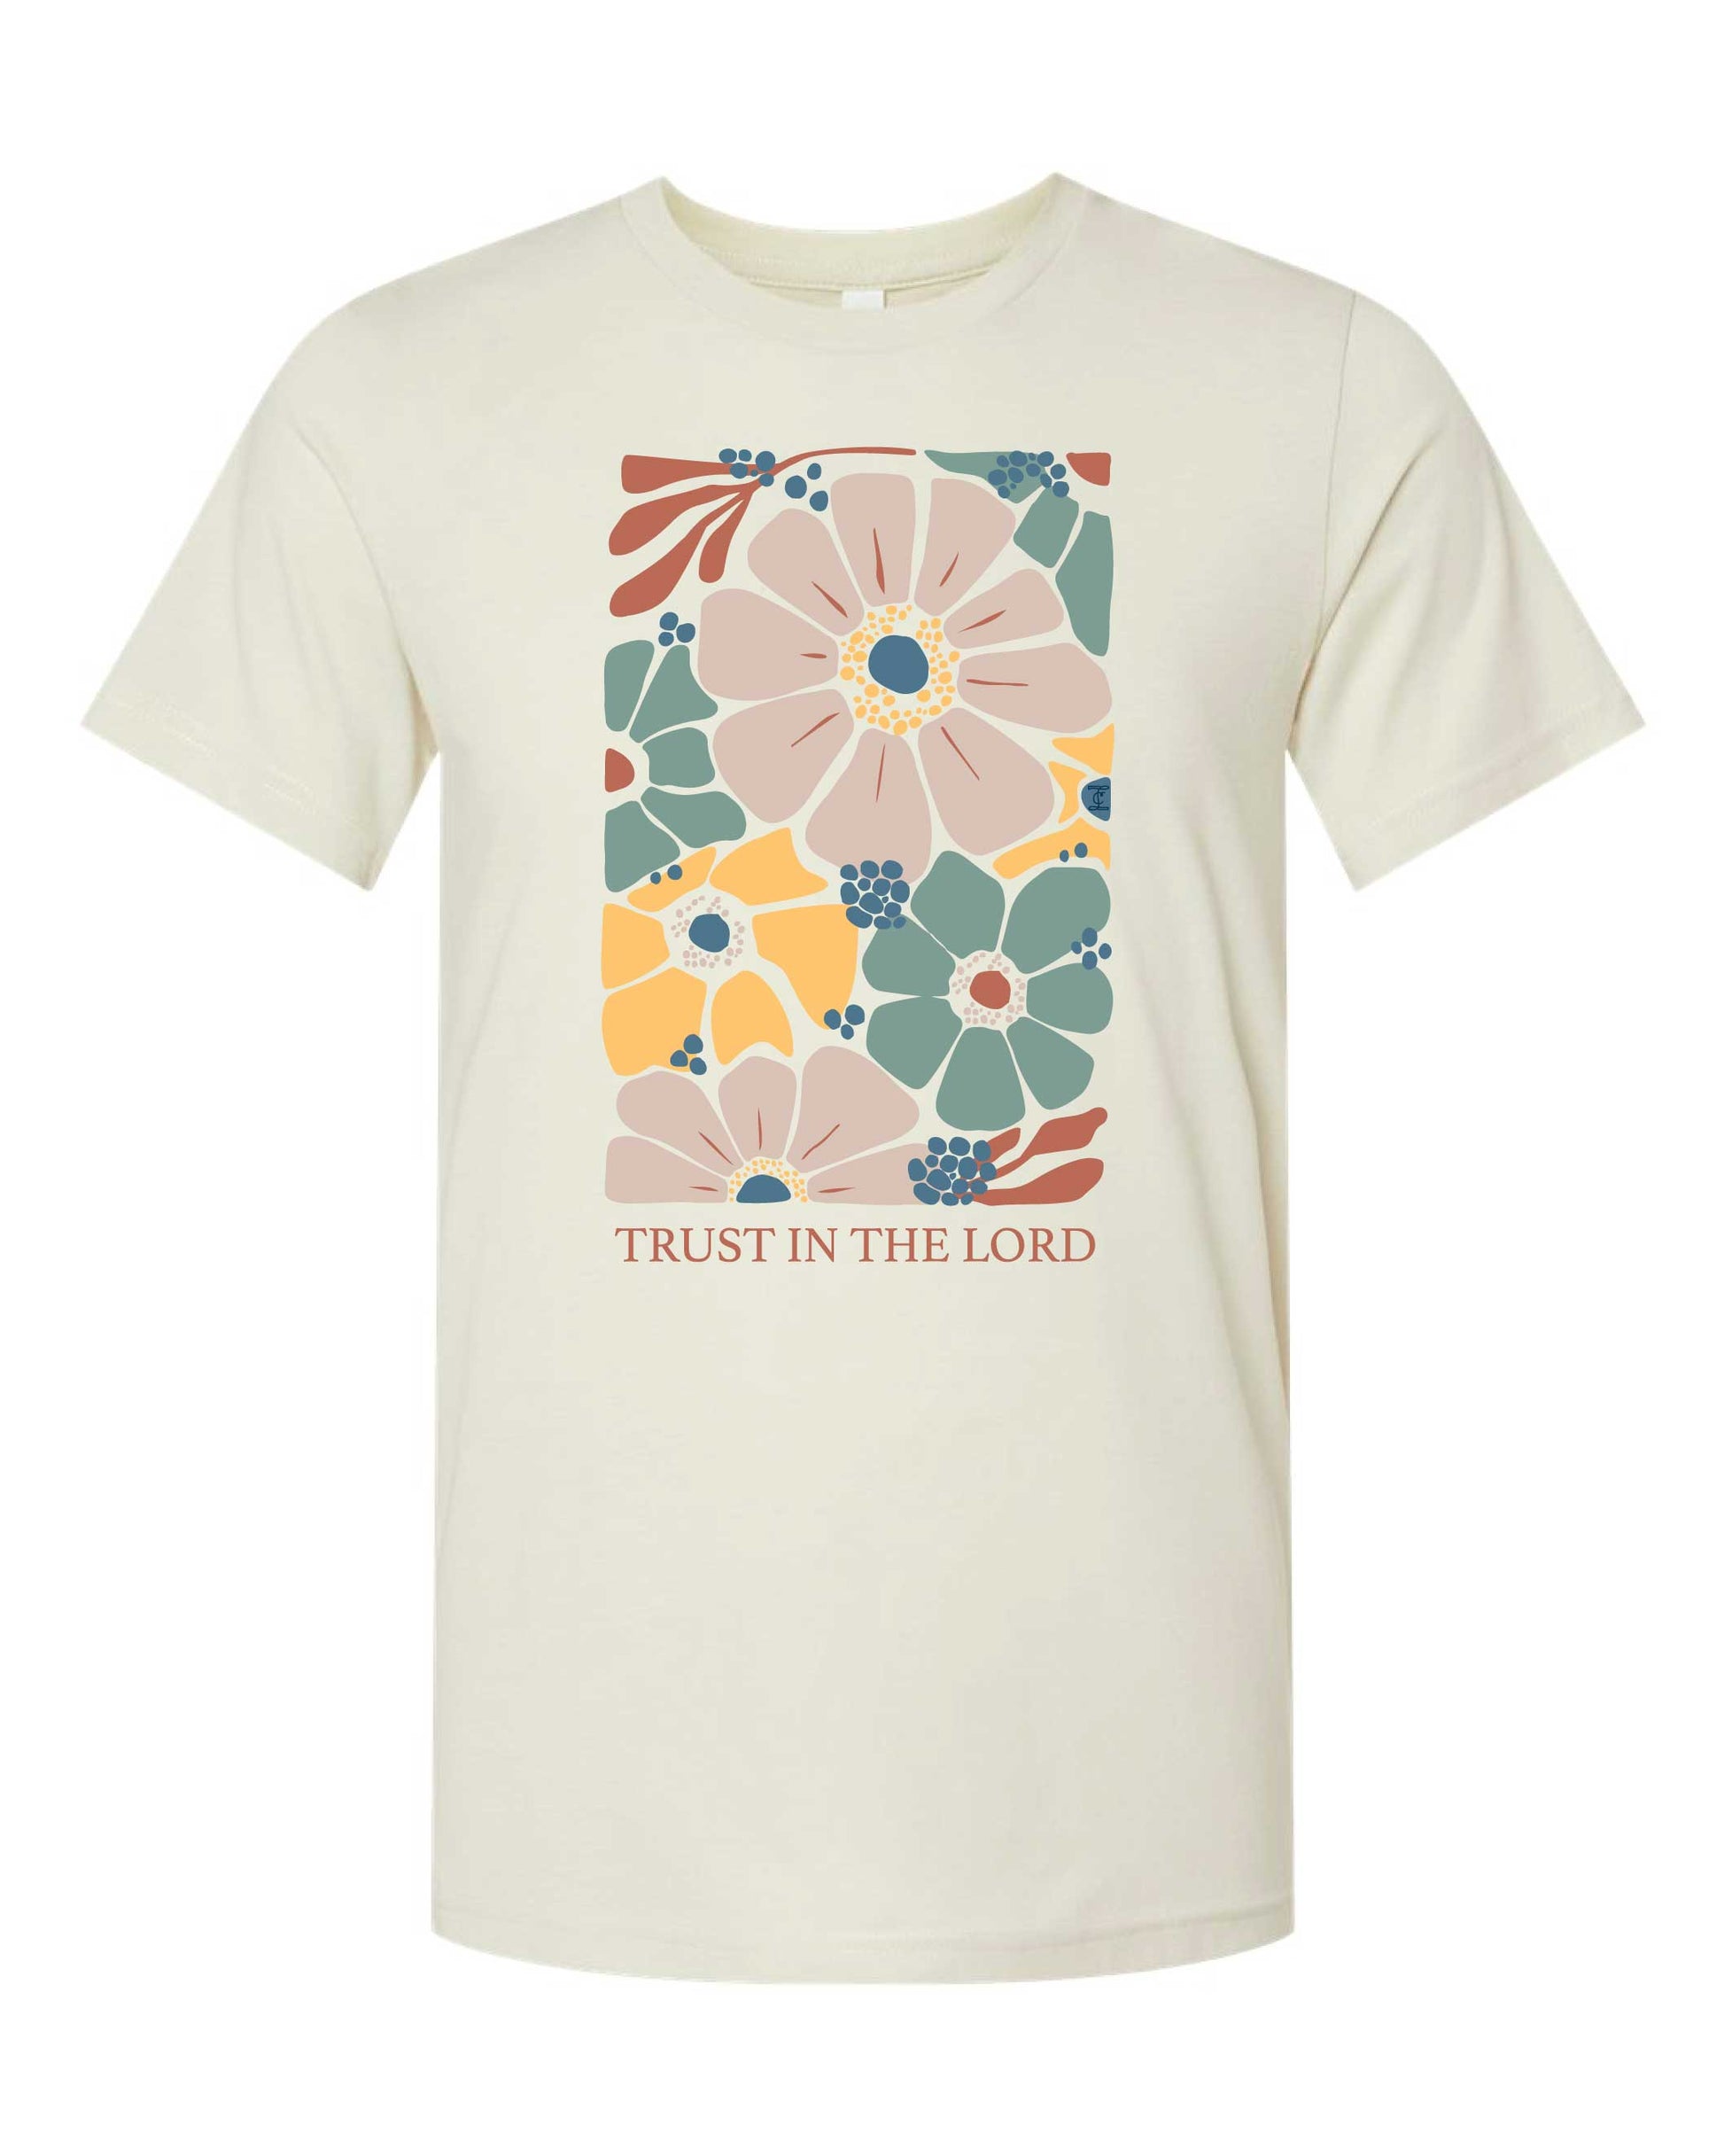 Inherit Trust in the Lord Graphic T-shirt IC Tops